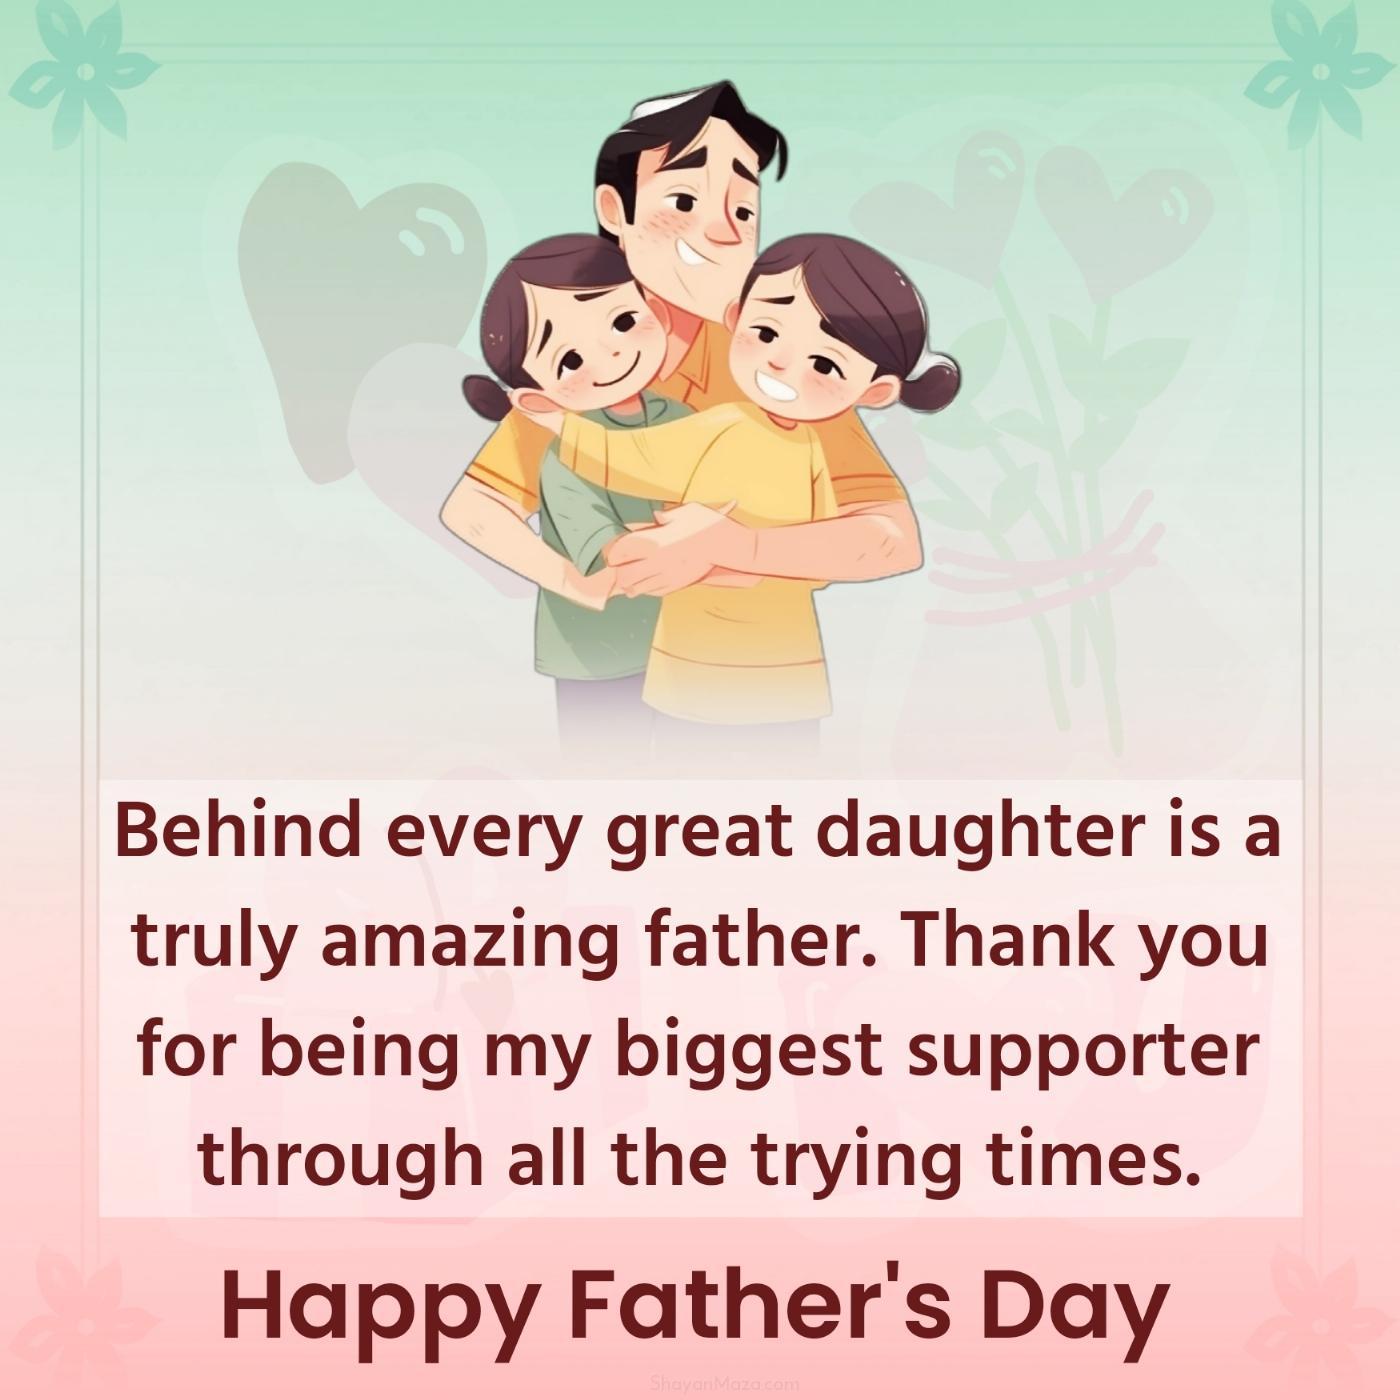 Behind every great daughter is a truly amazing father